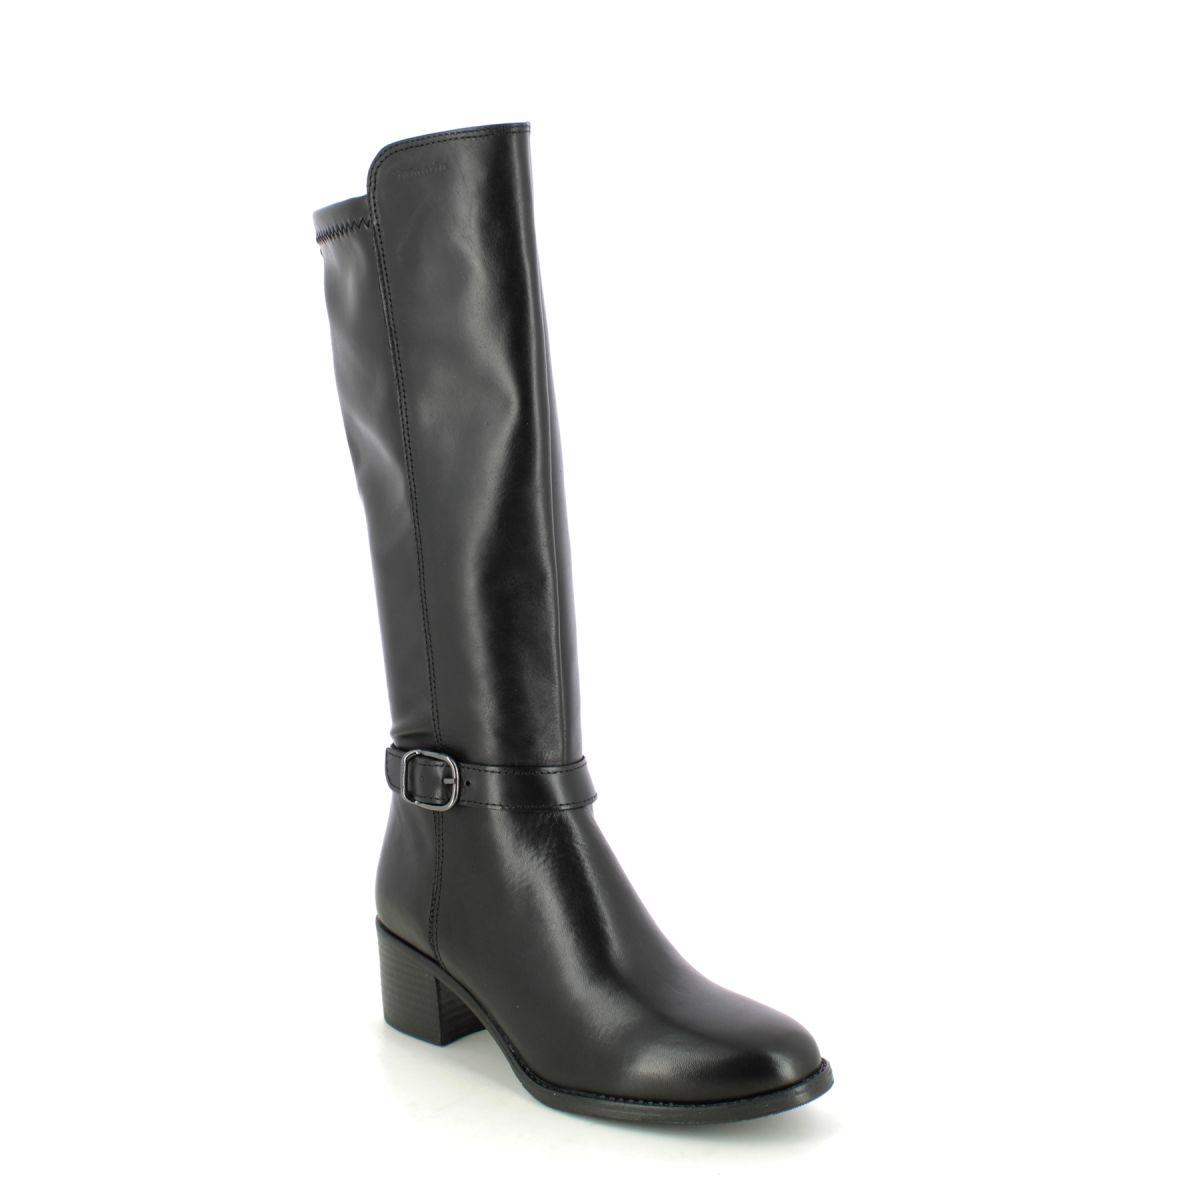 Tamaris Paulettalong Black Leather Womens Knee-High Boots 25530-27-001 In Size 37 In Plain Black Leather